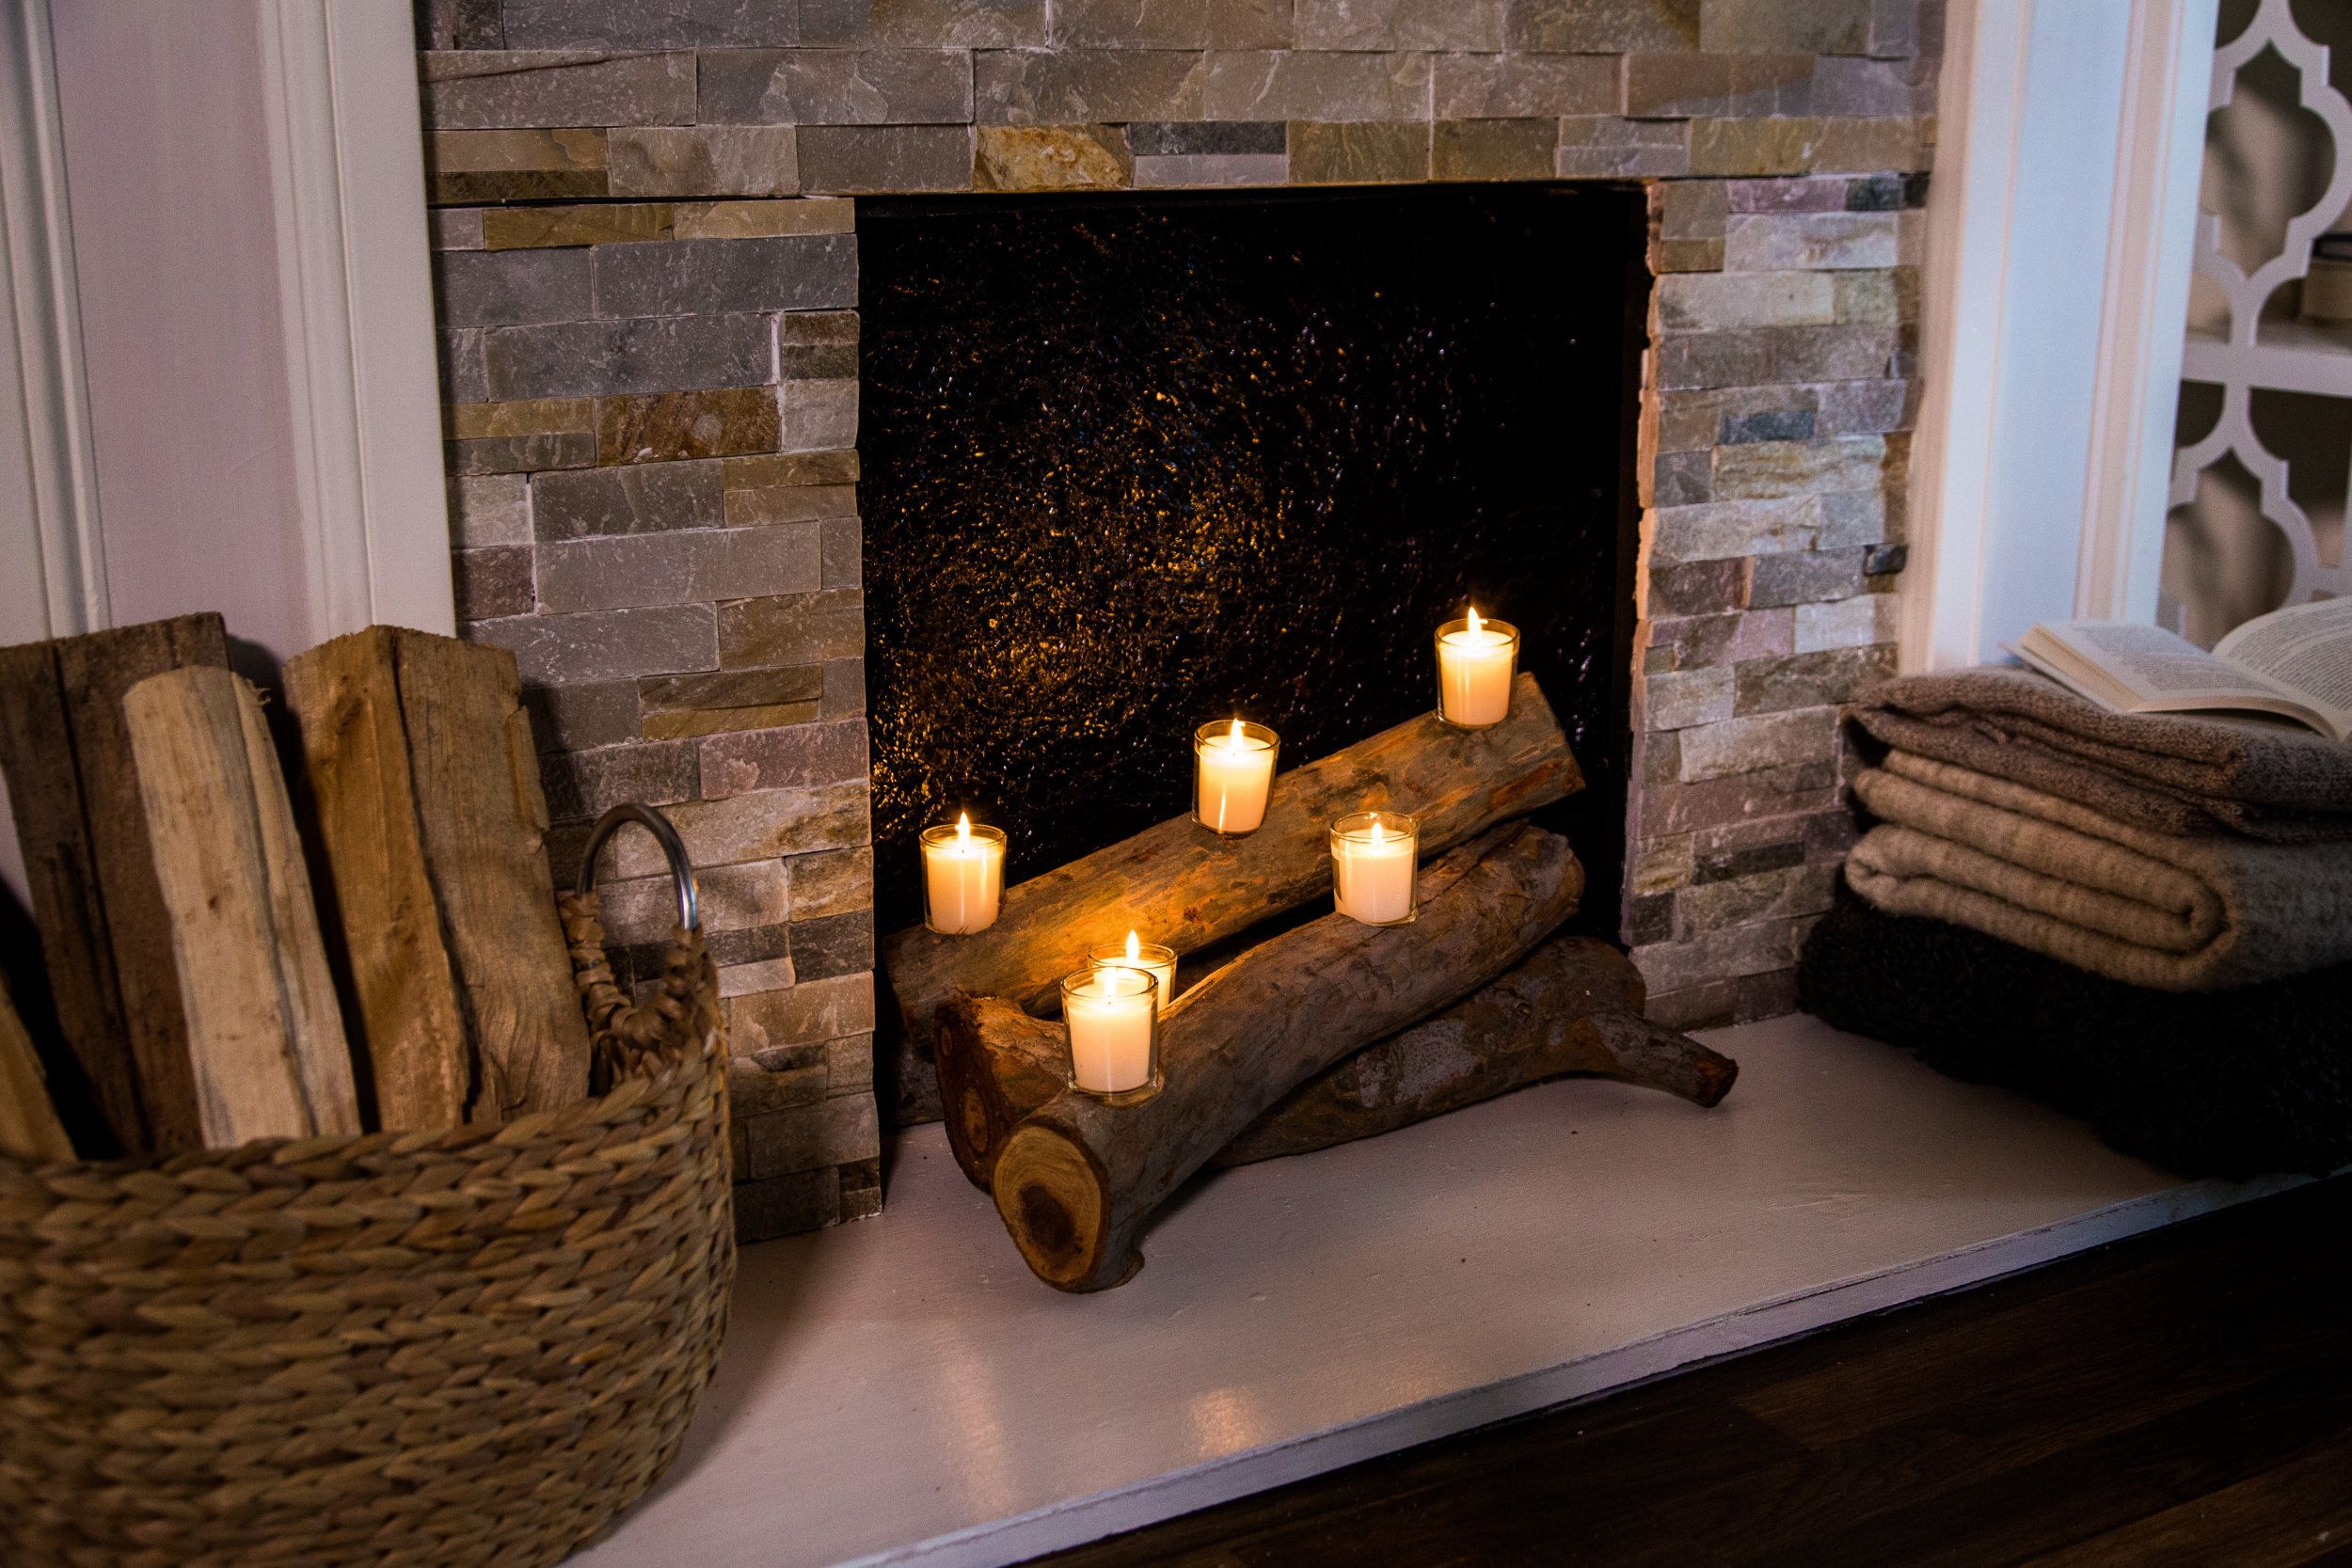 How to Build A Fire In A Fireplace New Diy Faux Fireplace Logs Home & Family